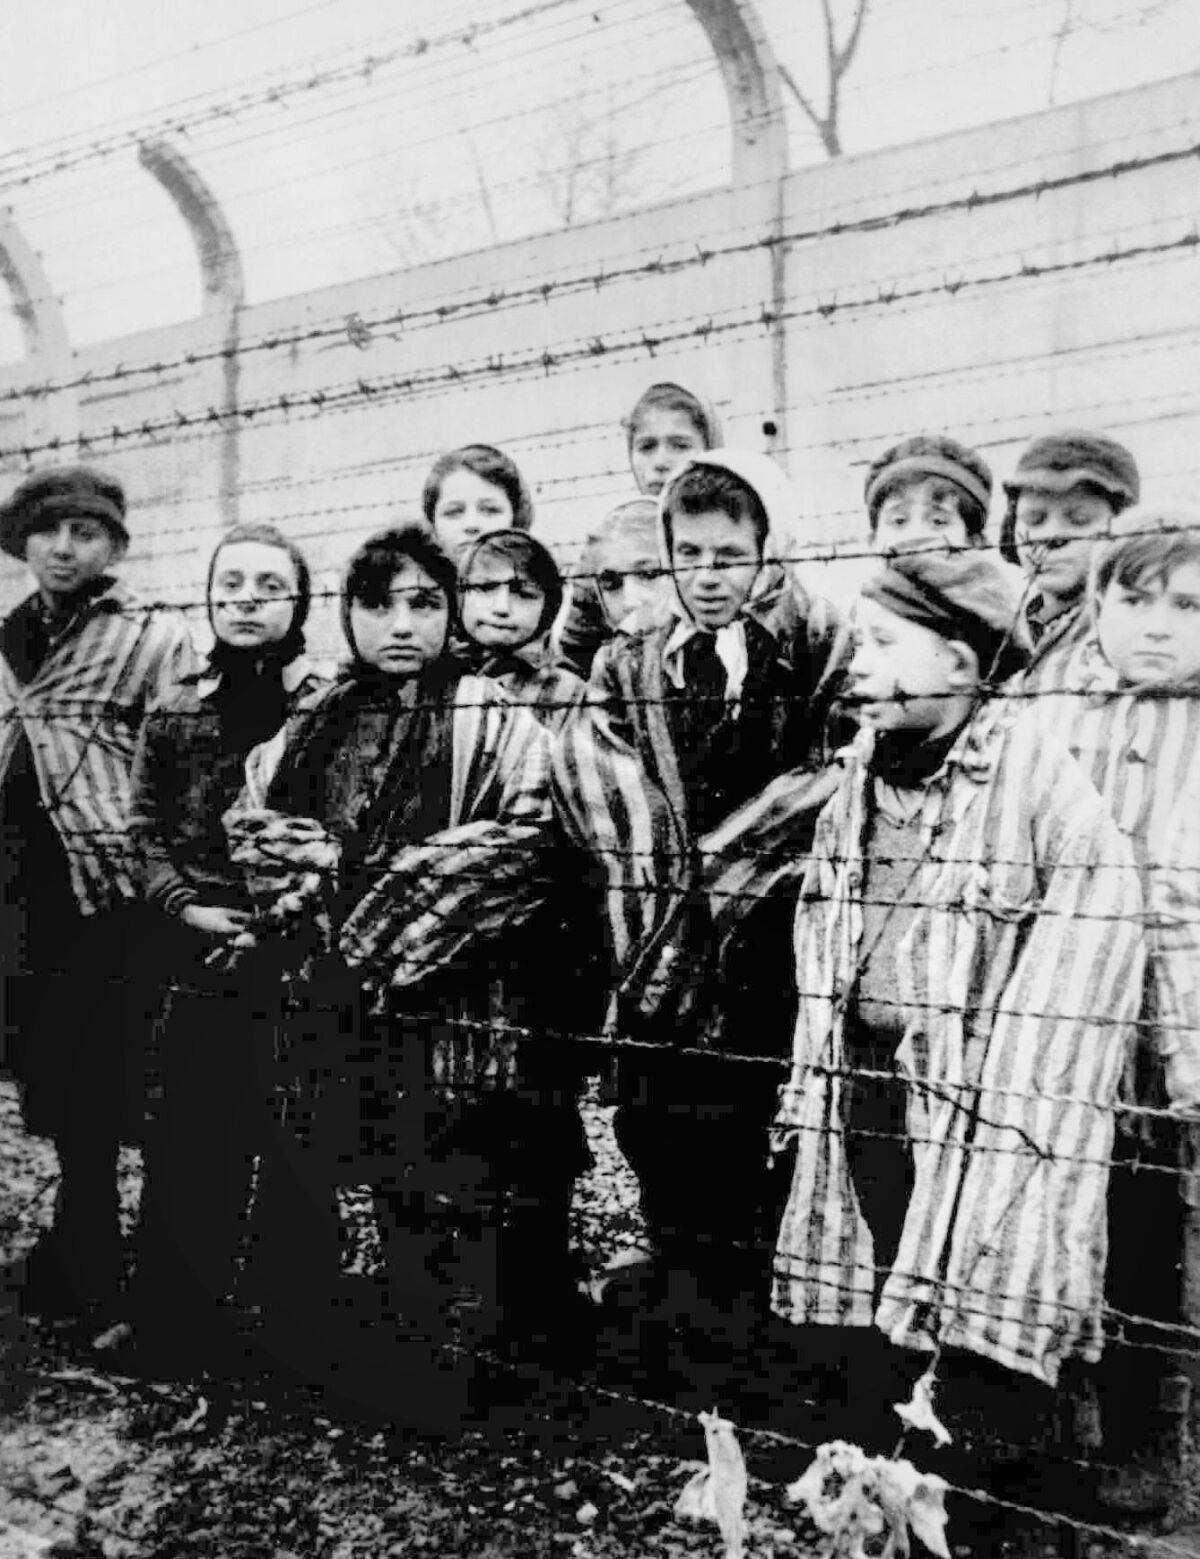 Children are liberated from Auschwitz in Poland by Russian soldiers in April 1945.